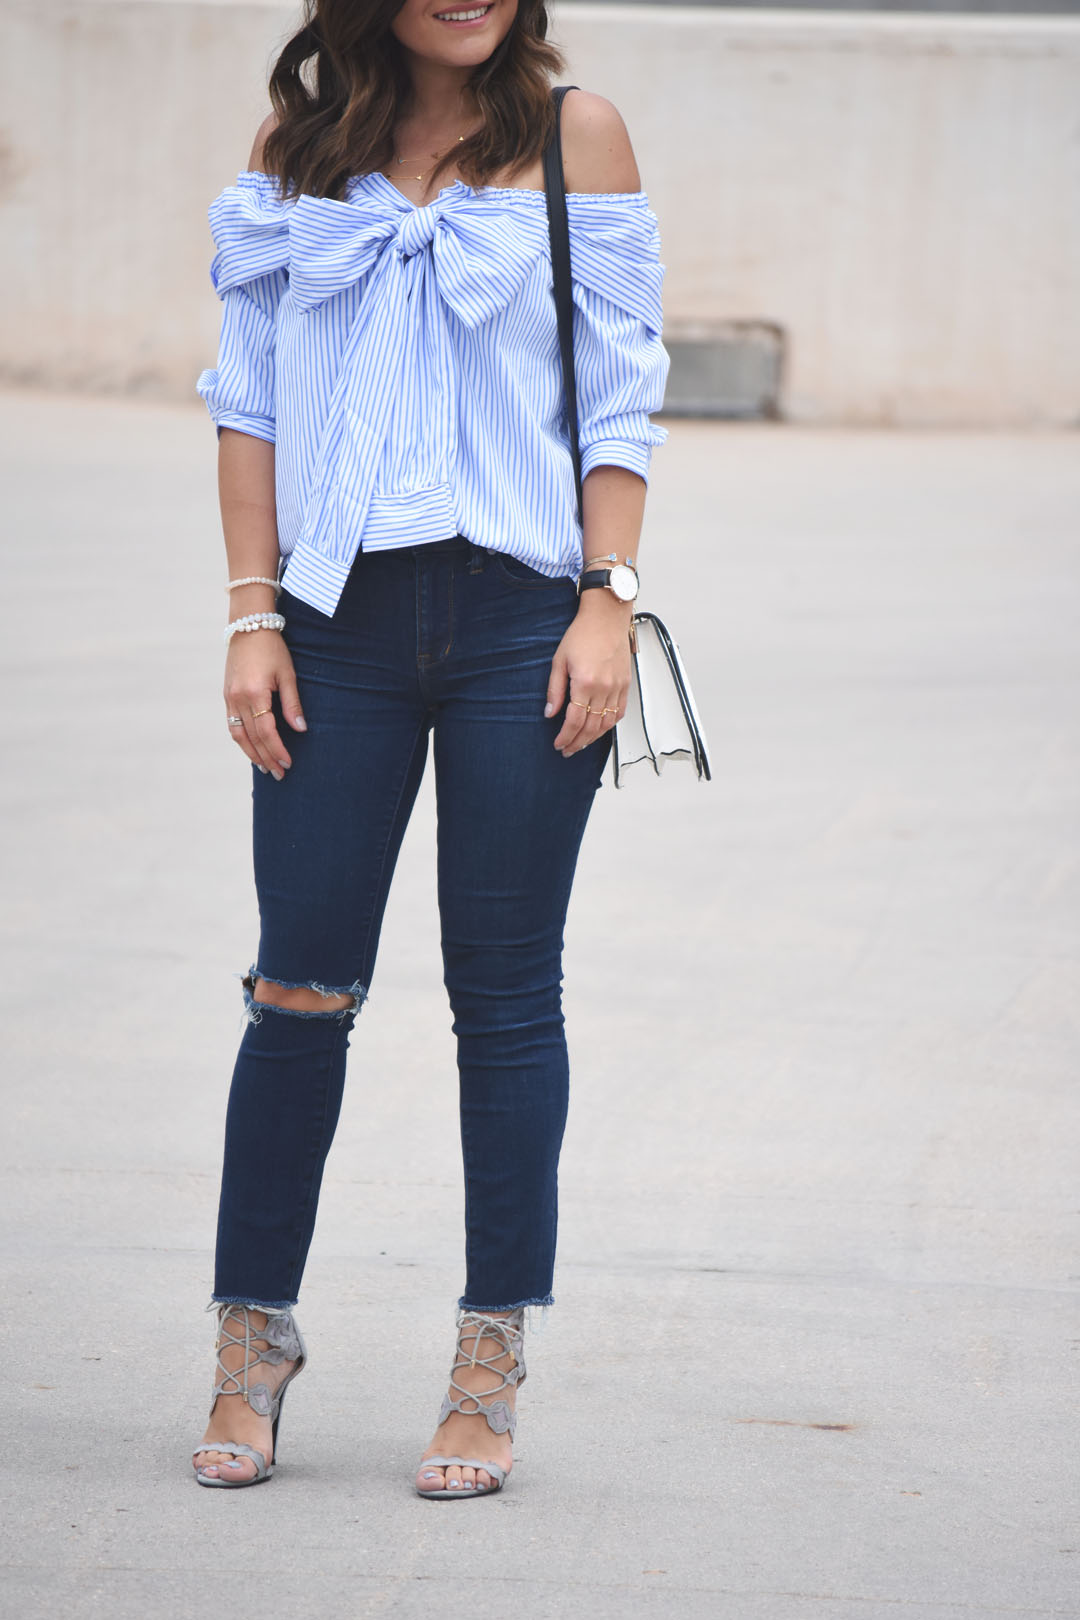 Carolina Hellal of the fashion blog Chic Talk wearing a casual look with a SheIn off the shoulder top and Madewell ripped jeans